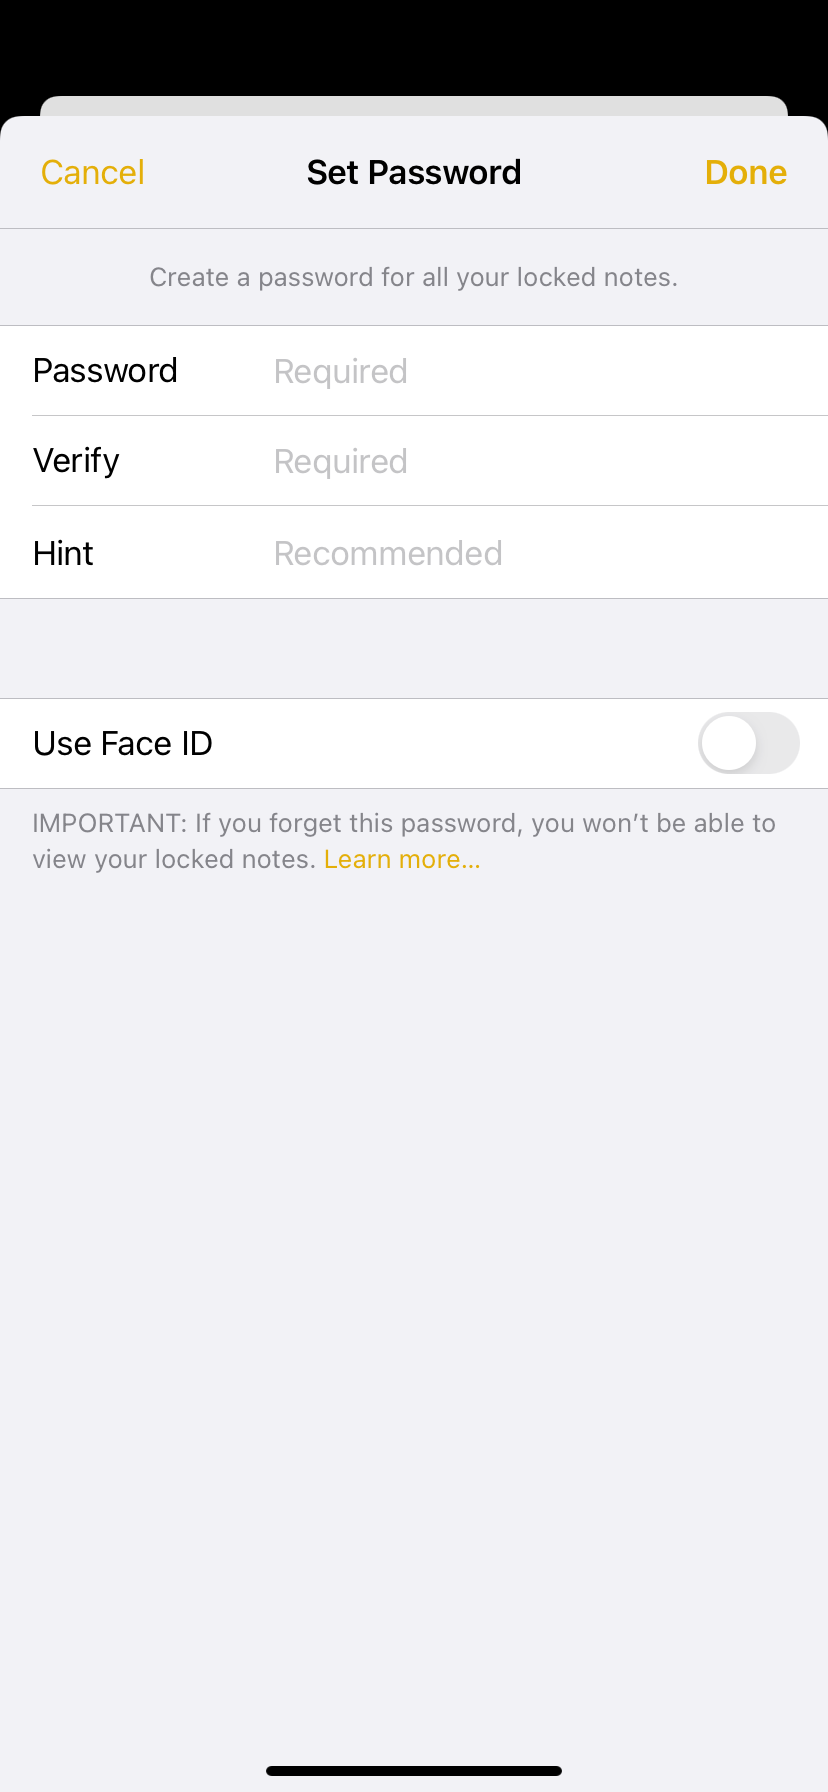 Image shows setting a password inside Apple Notes app